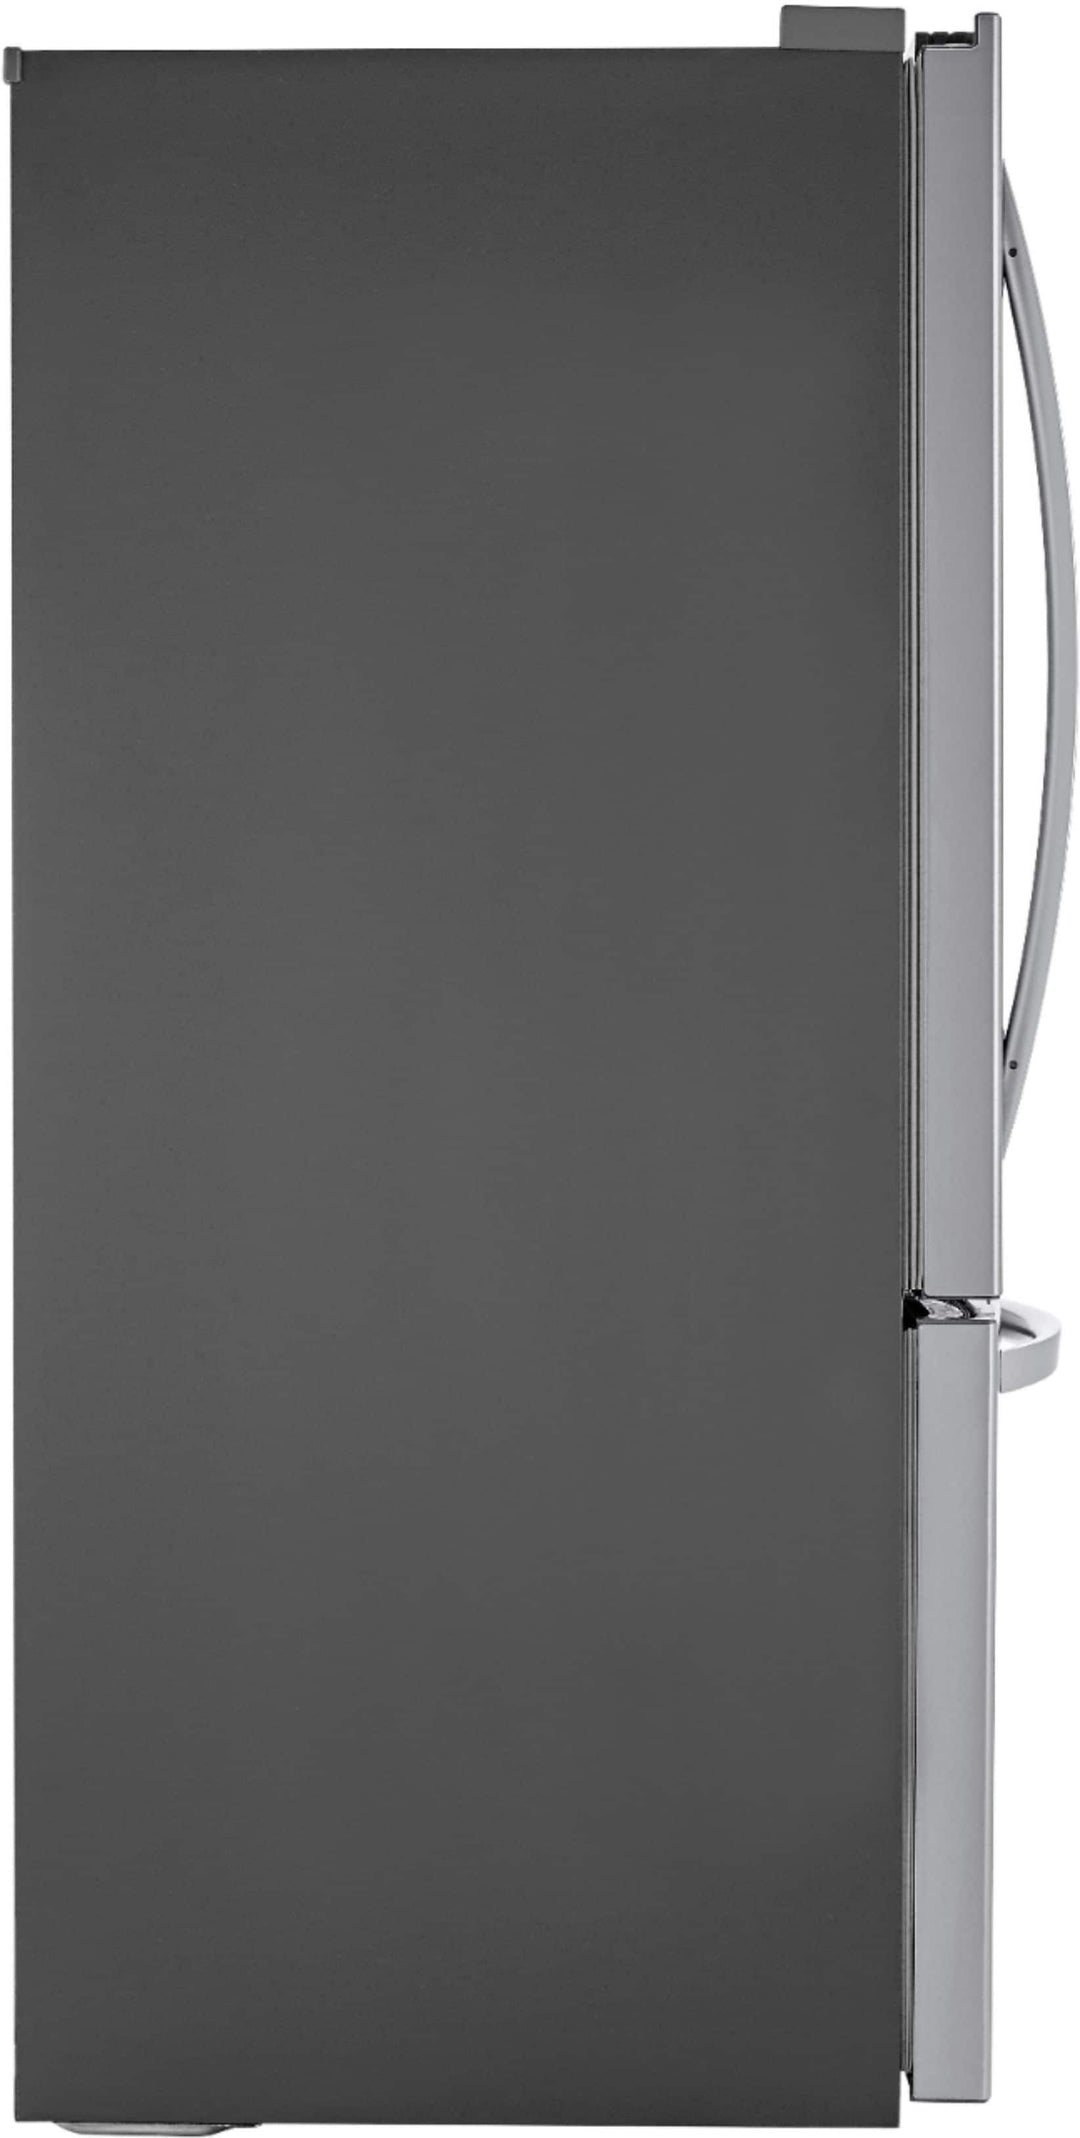 LG - 25.5 Cu. Ft. Bottom-Freezer Refrigerator with Ice Maker - Stainless steel_20